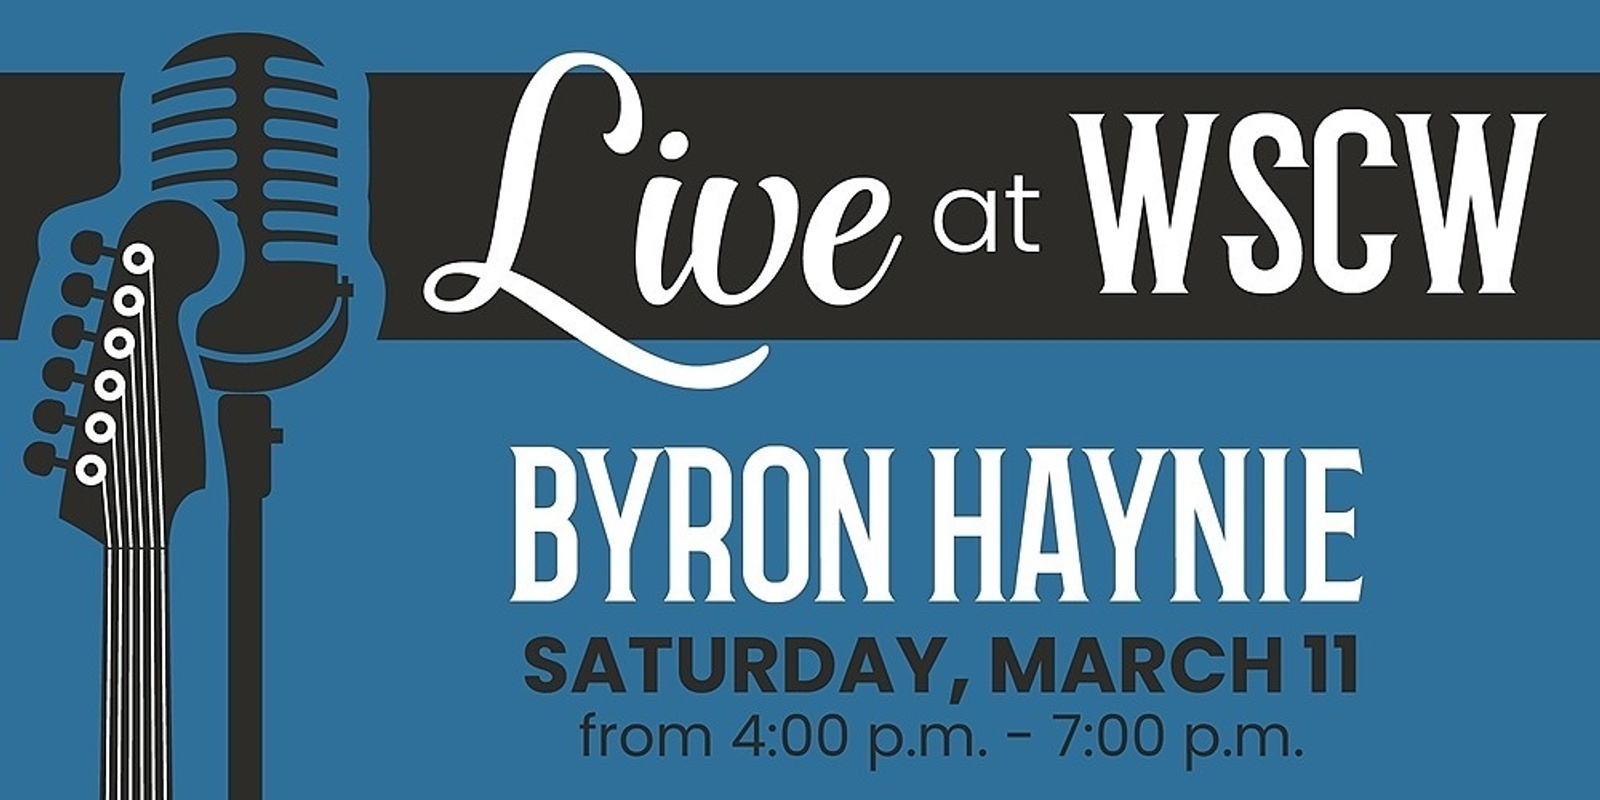 Banner image for Byron Haynie Live at WSCW March 11